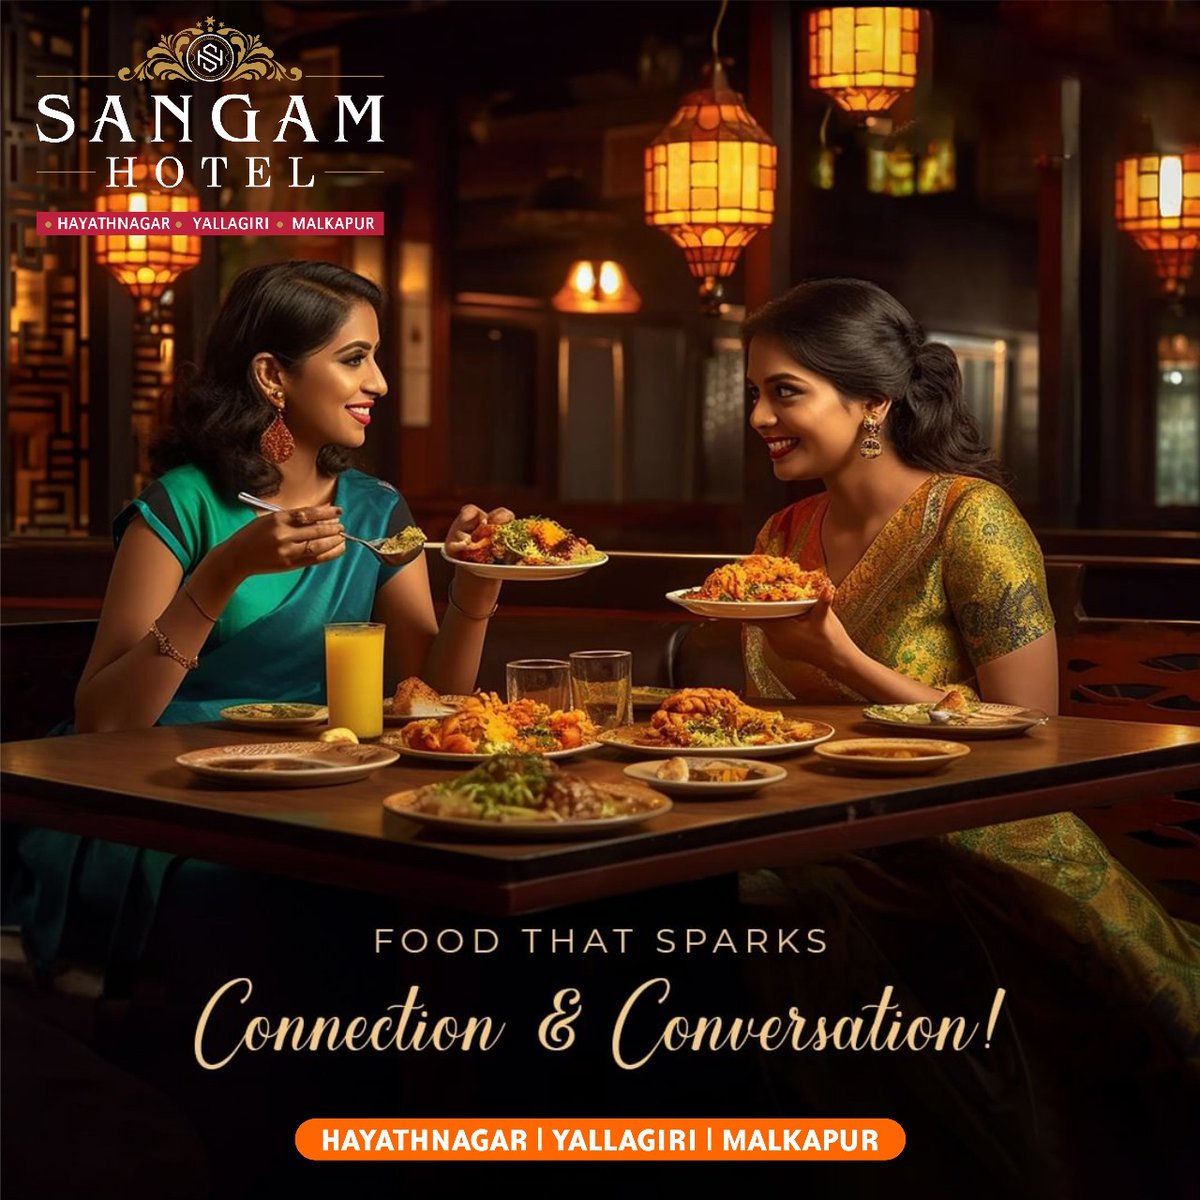 Food that Sparks Connection & Conversation!! @sangamhotelsko

#indianfood #foodie #food #foodphotography #foodblogger #foodporn #foodstagram  #foodlover #northindianfood #homemade  #instafood #foodgasm #delicious #desifood #yummy